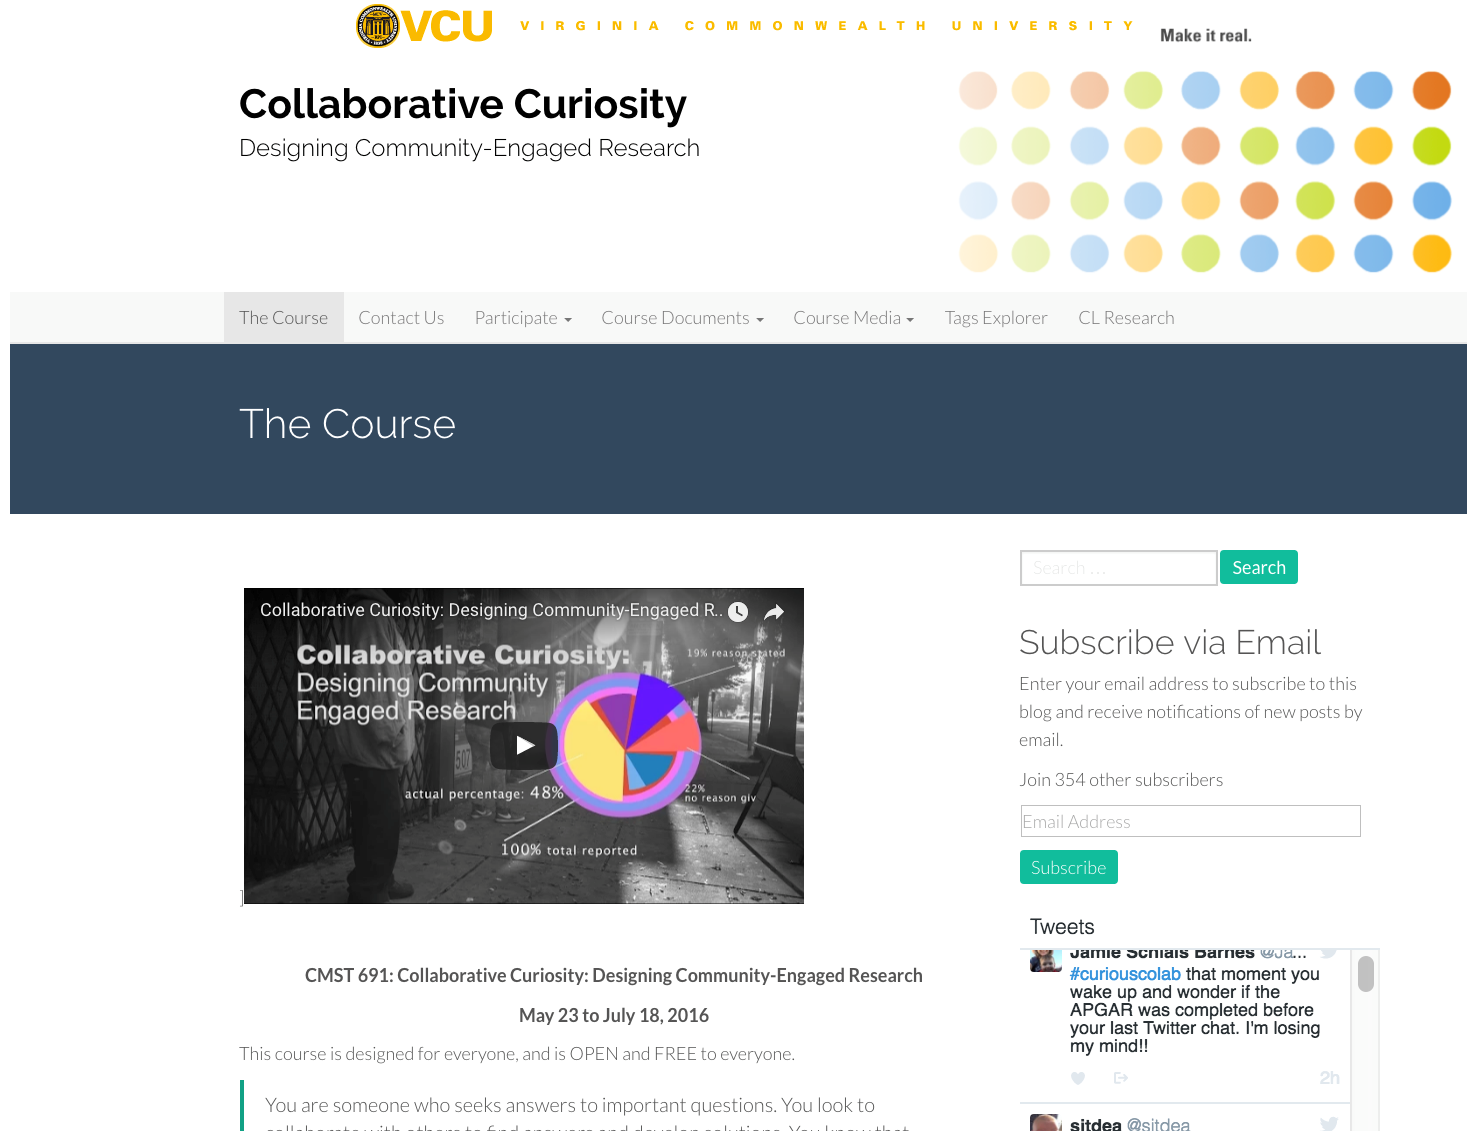 Course Homepage with course description, link to the course video trailer, and twitter feed.